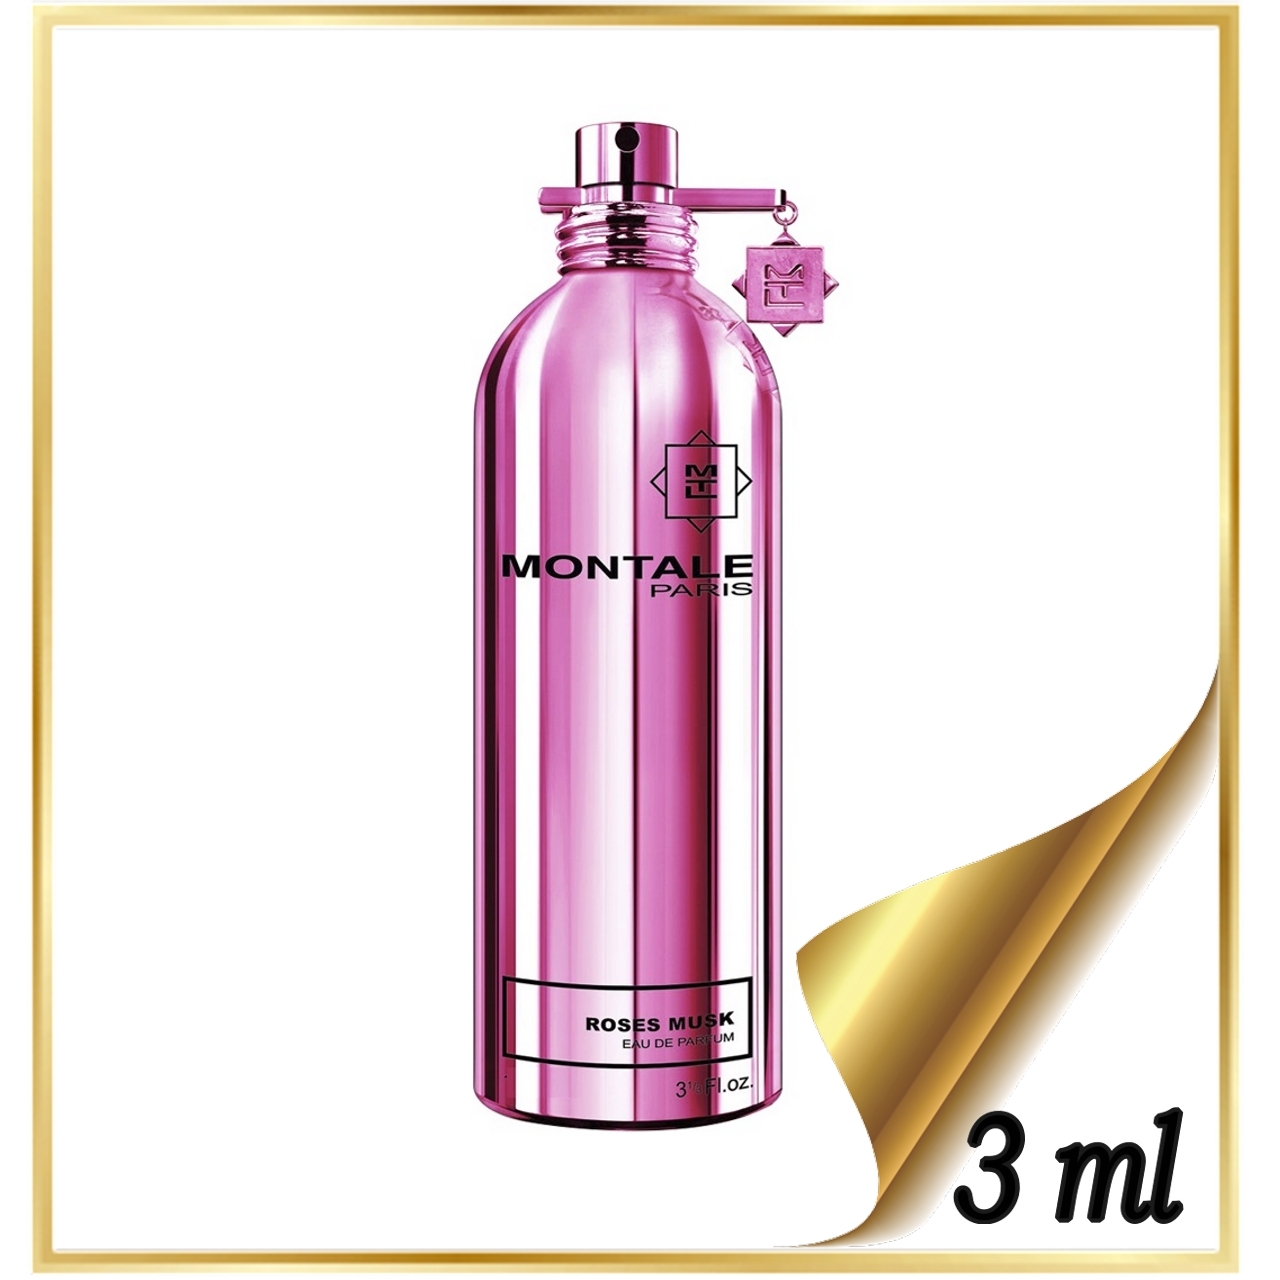 Roses musk парфюмерная вода. Montale Roses Musk. Montale Roses Musk реклама. Montale Roses Musk отзывы. 153 Туалетная вода.